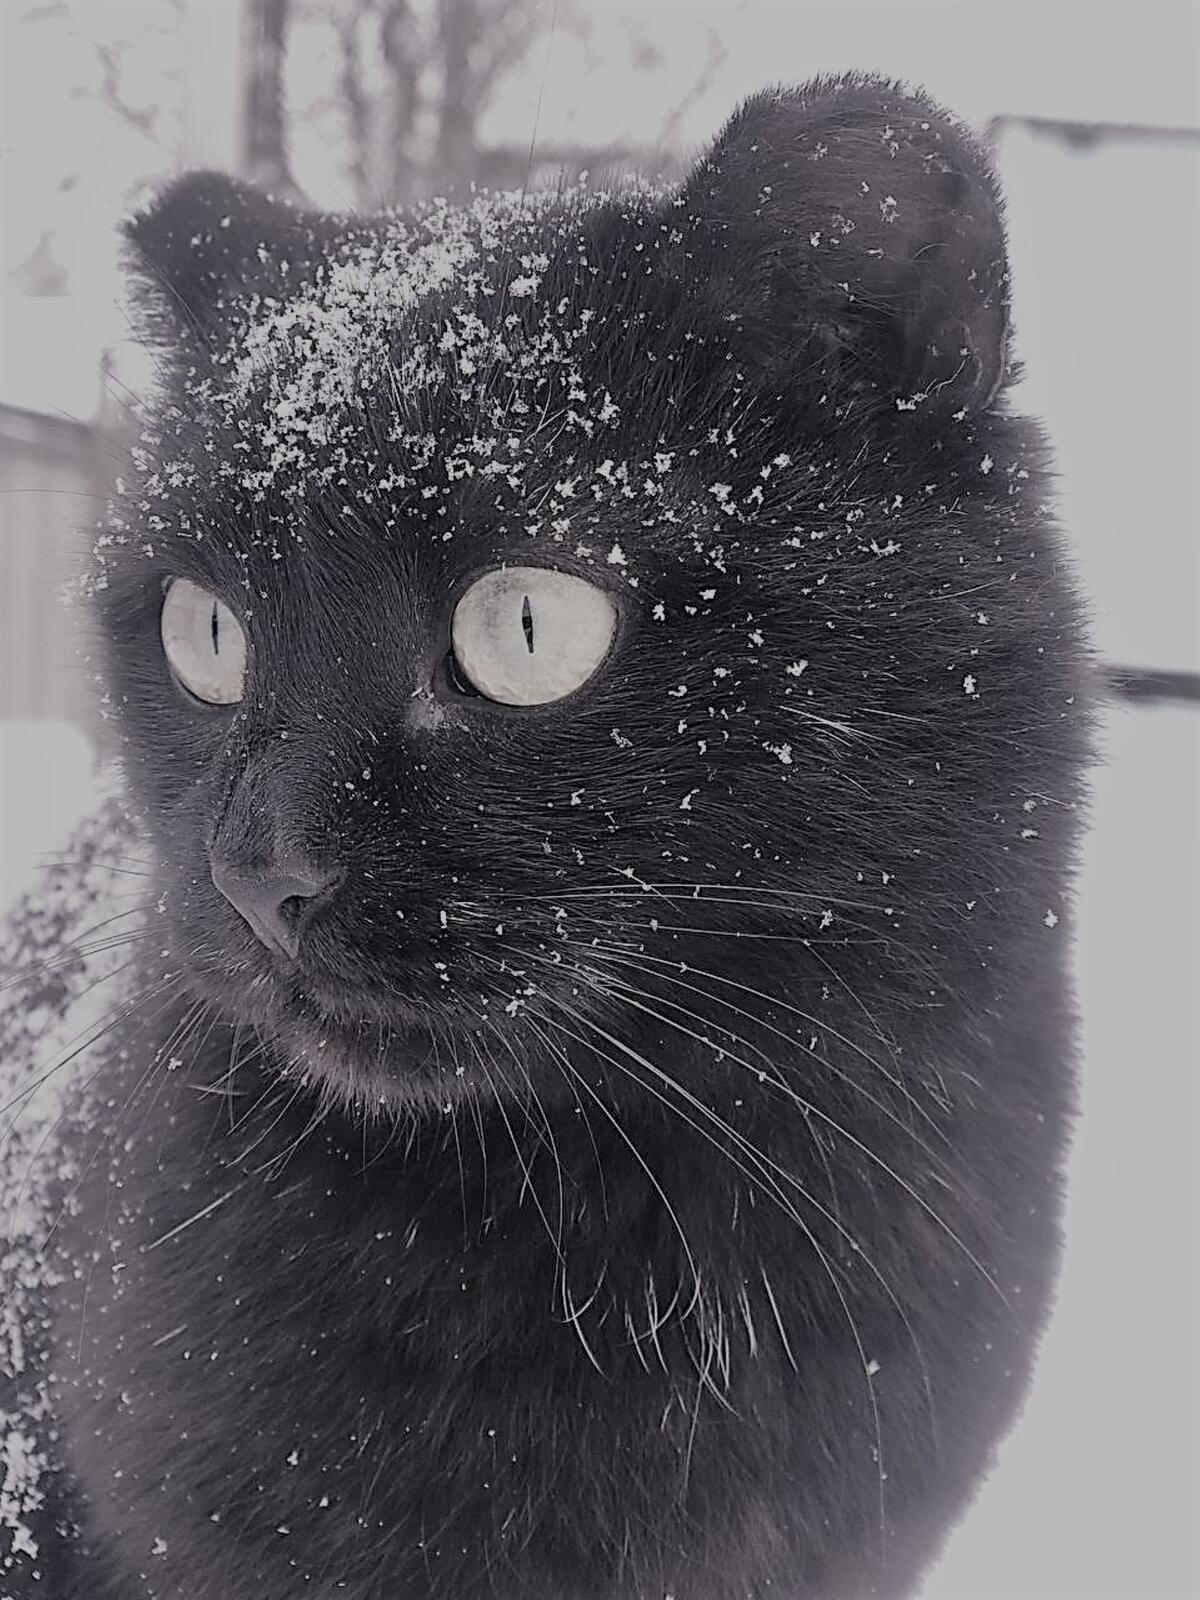 A black cat covered with snow